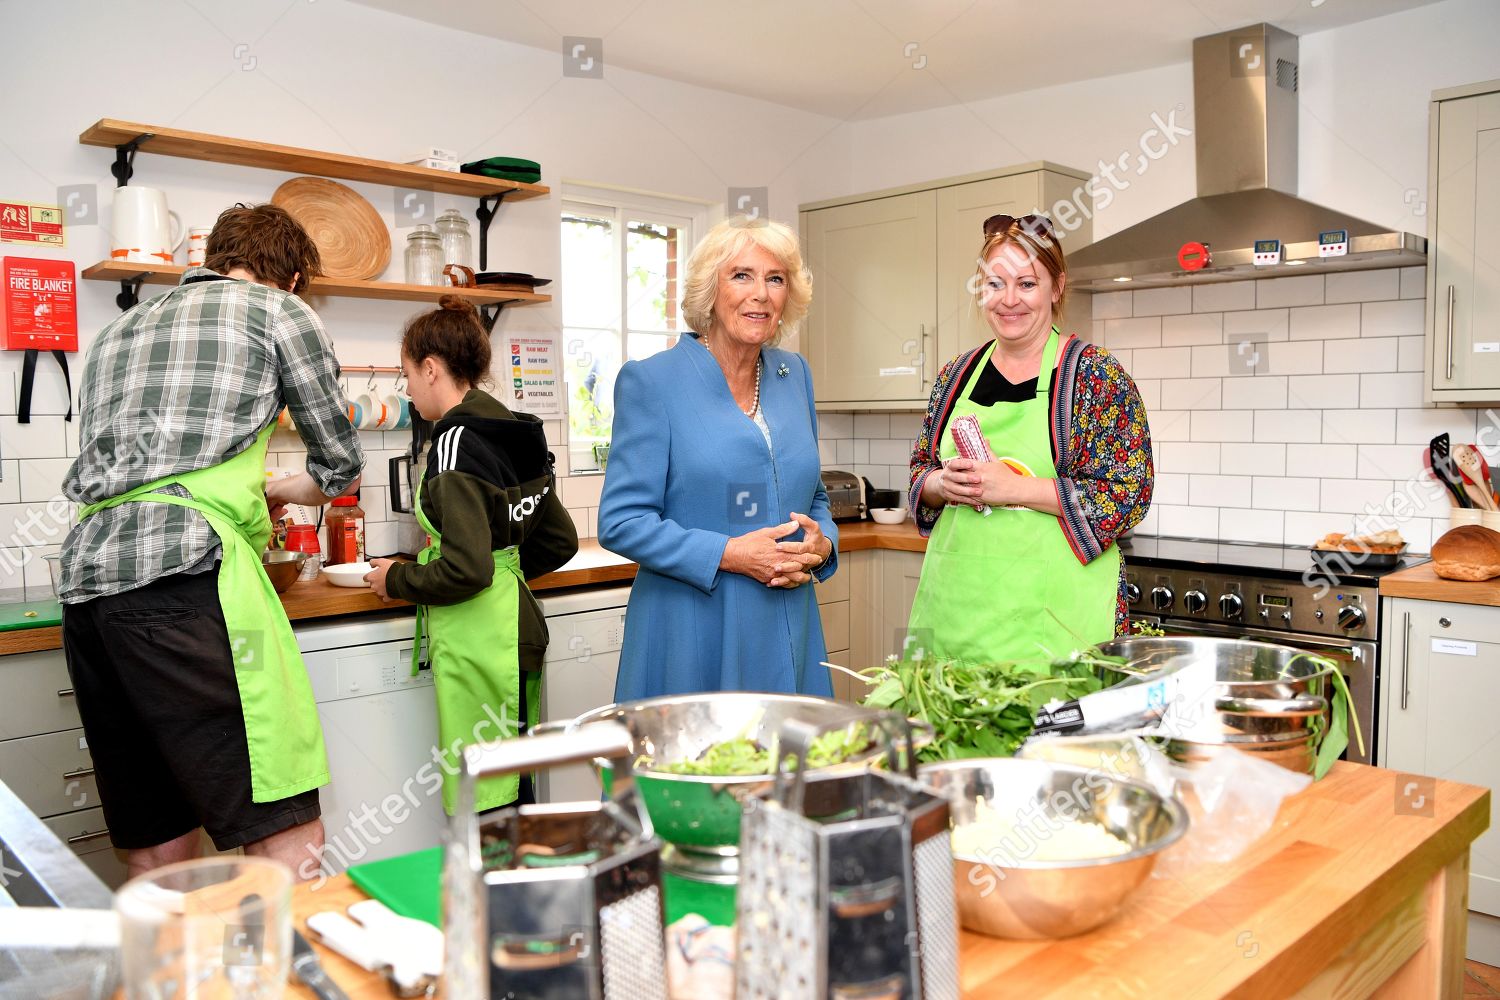 camilla-duchess-of-cornwall-visits-east-sussex-uk-shutterstock-editorial-10238528h.jpg